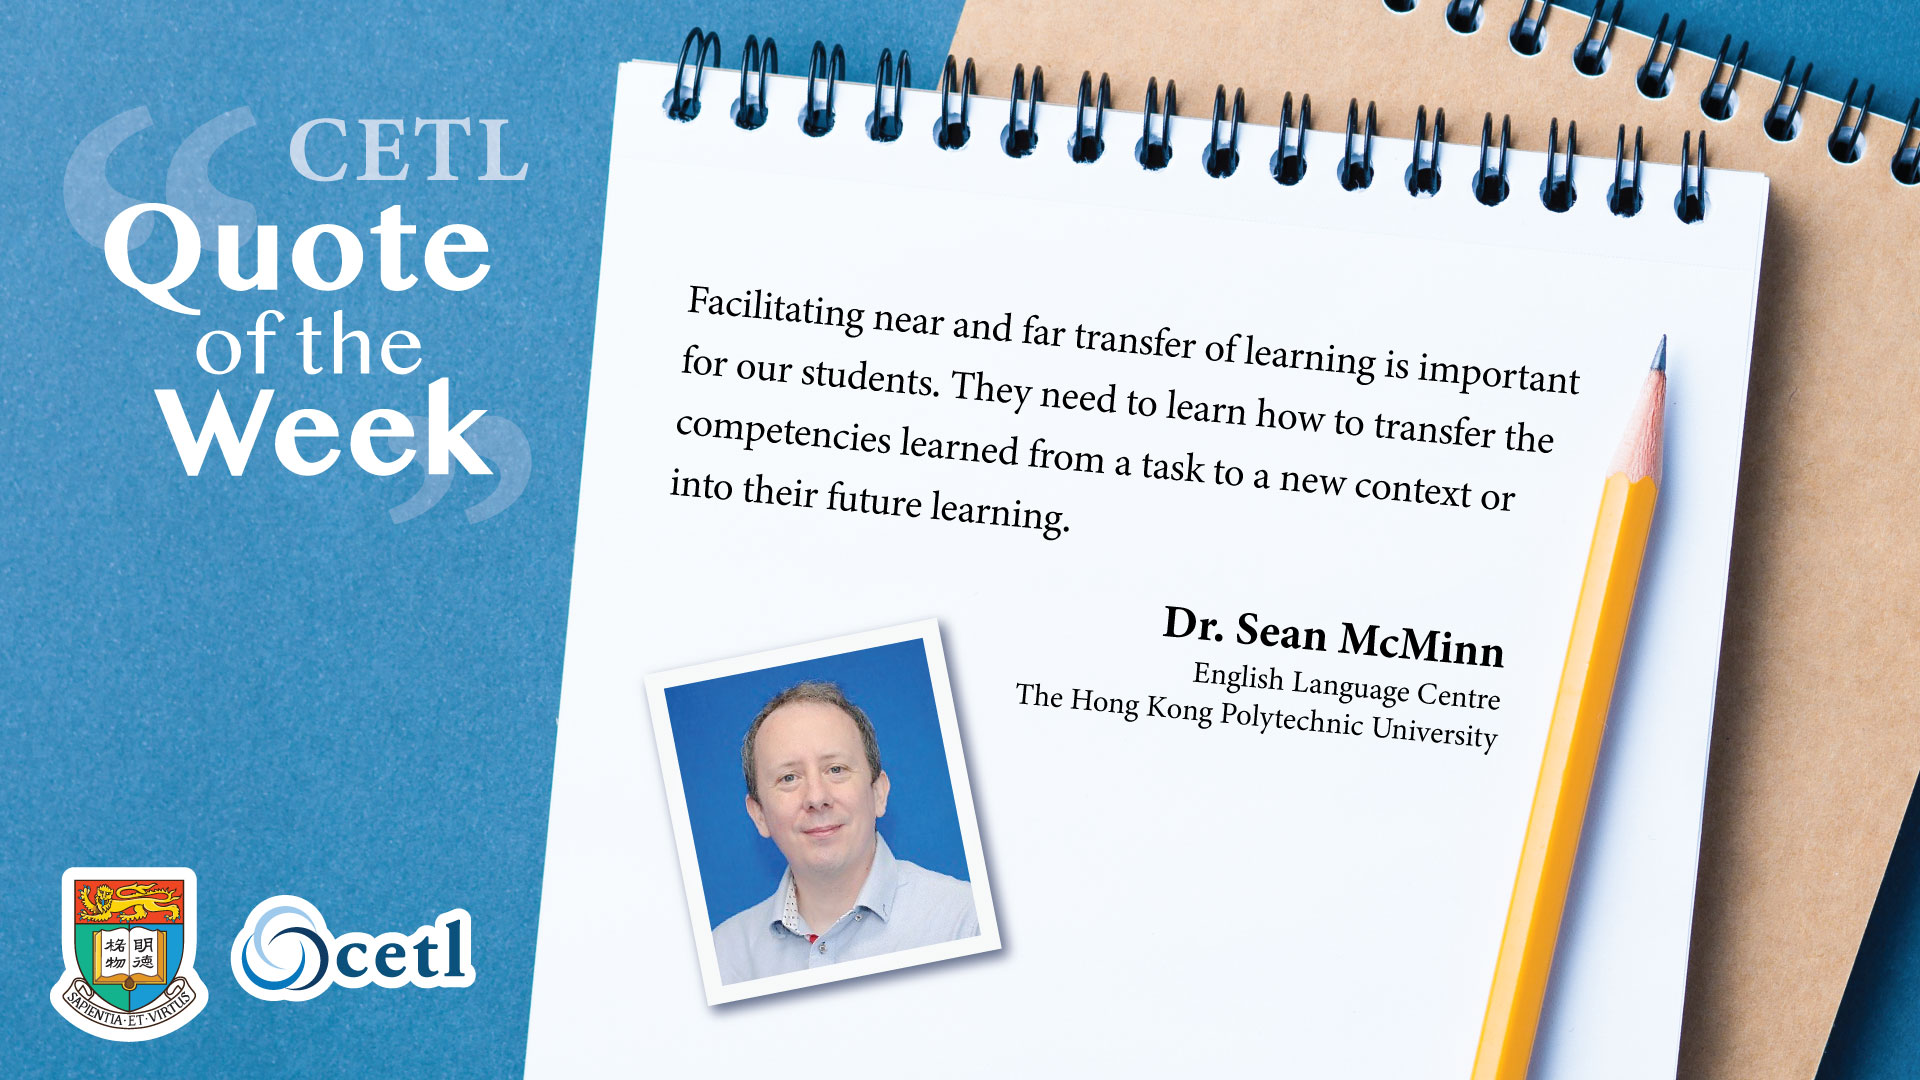 Dr. Sean McMinn - Facilitating near and far transfer of learning is important for our students. They need to learn how to transfer the competencies learned from a task to a new context or into their future learning.